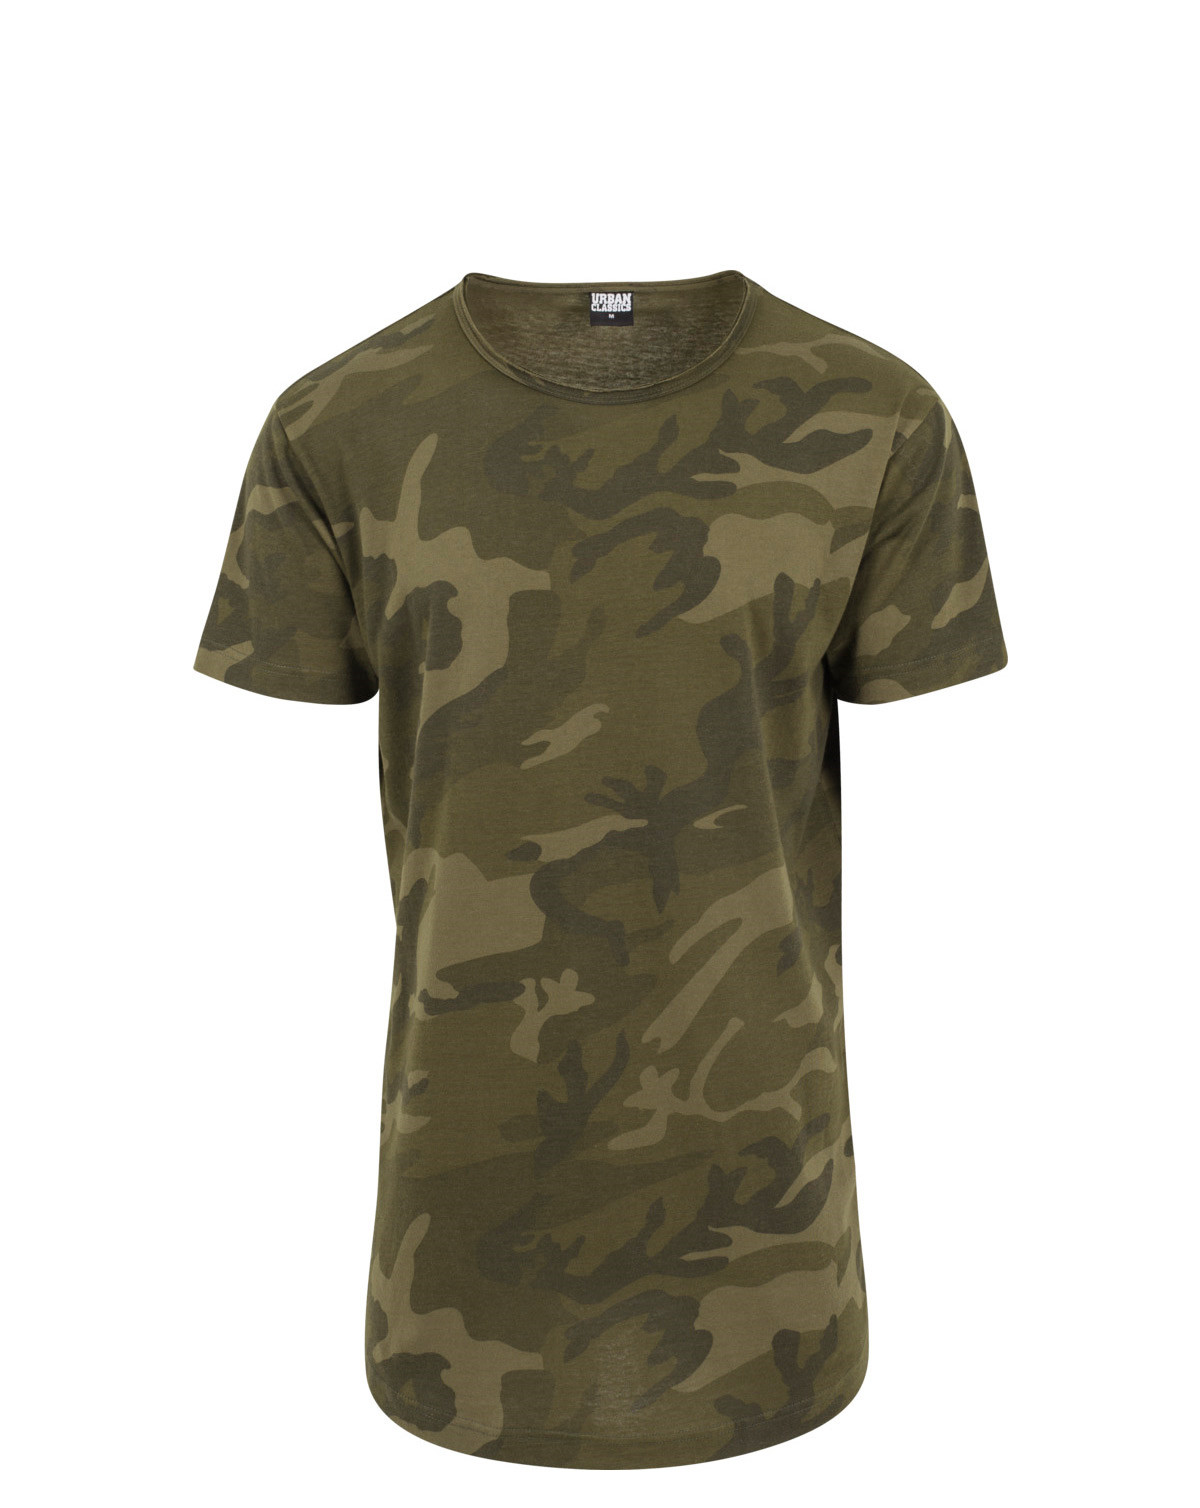 Urban Classics Lang Camouflage T-shirt (Oliven Camo, S)